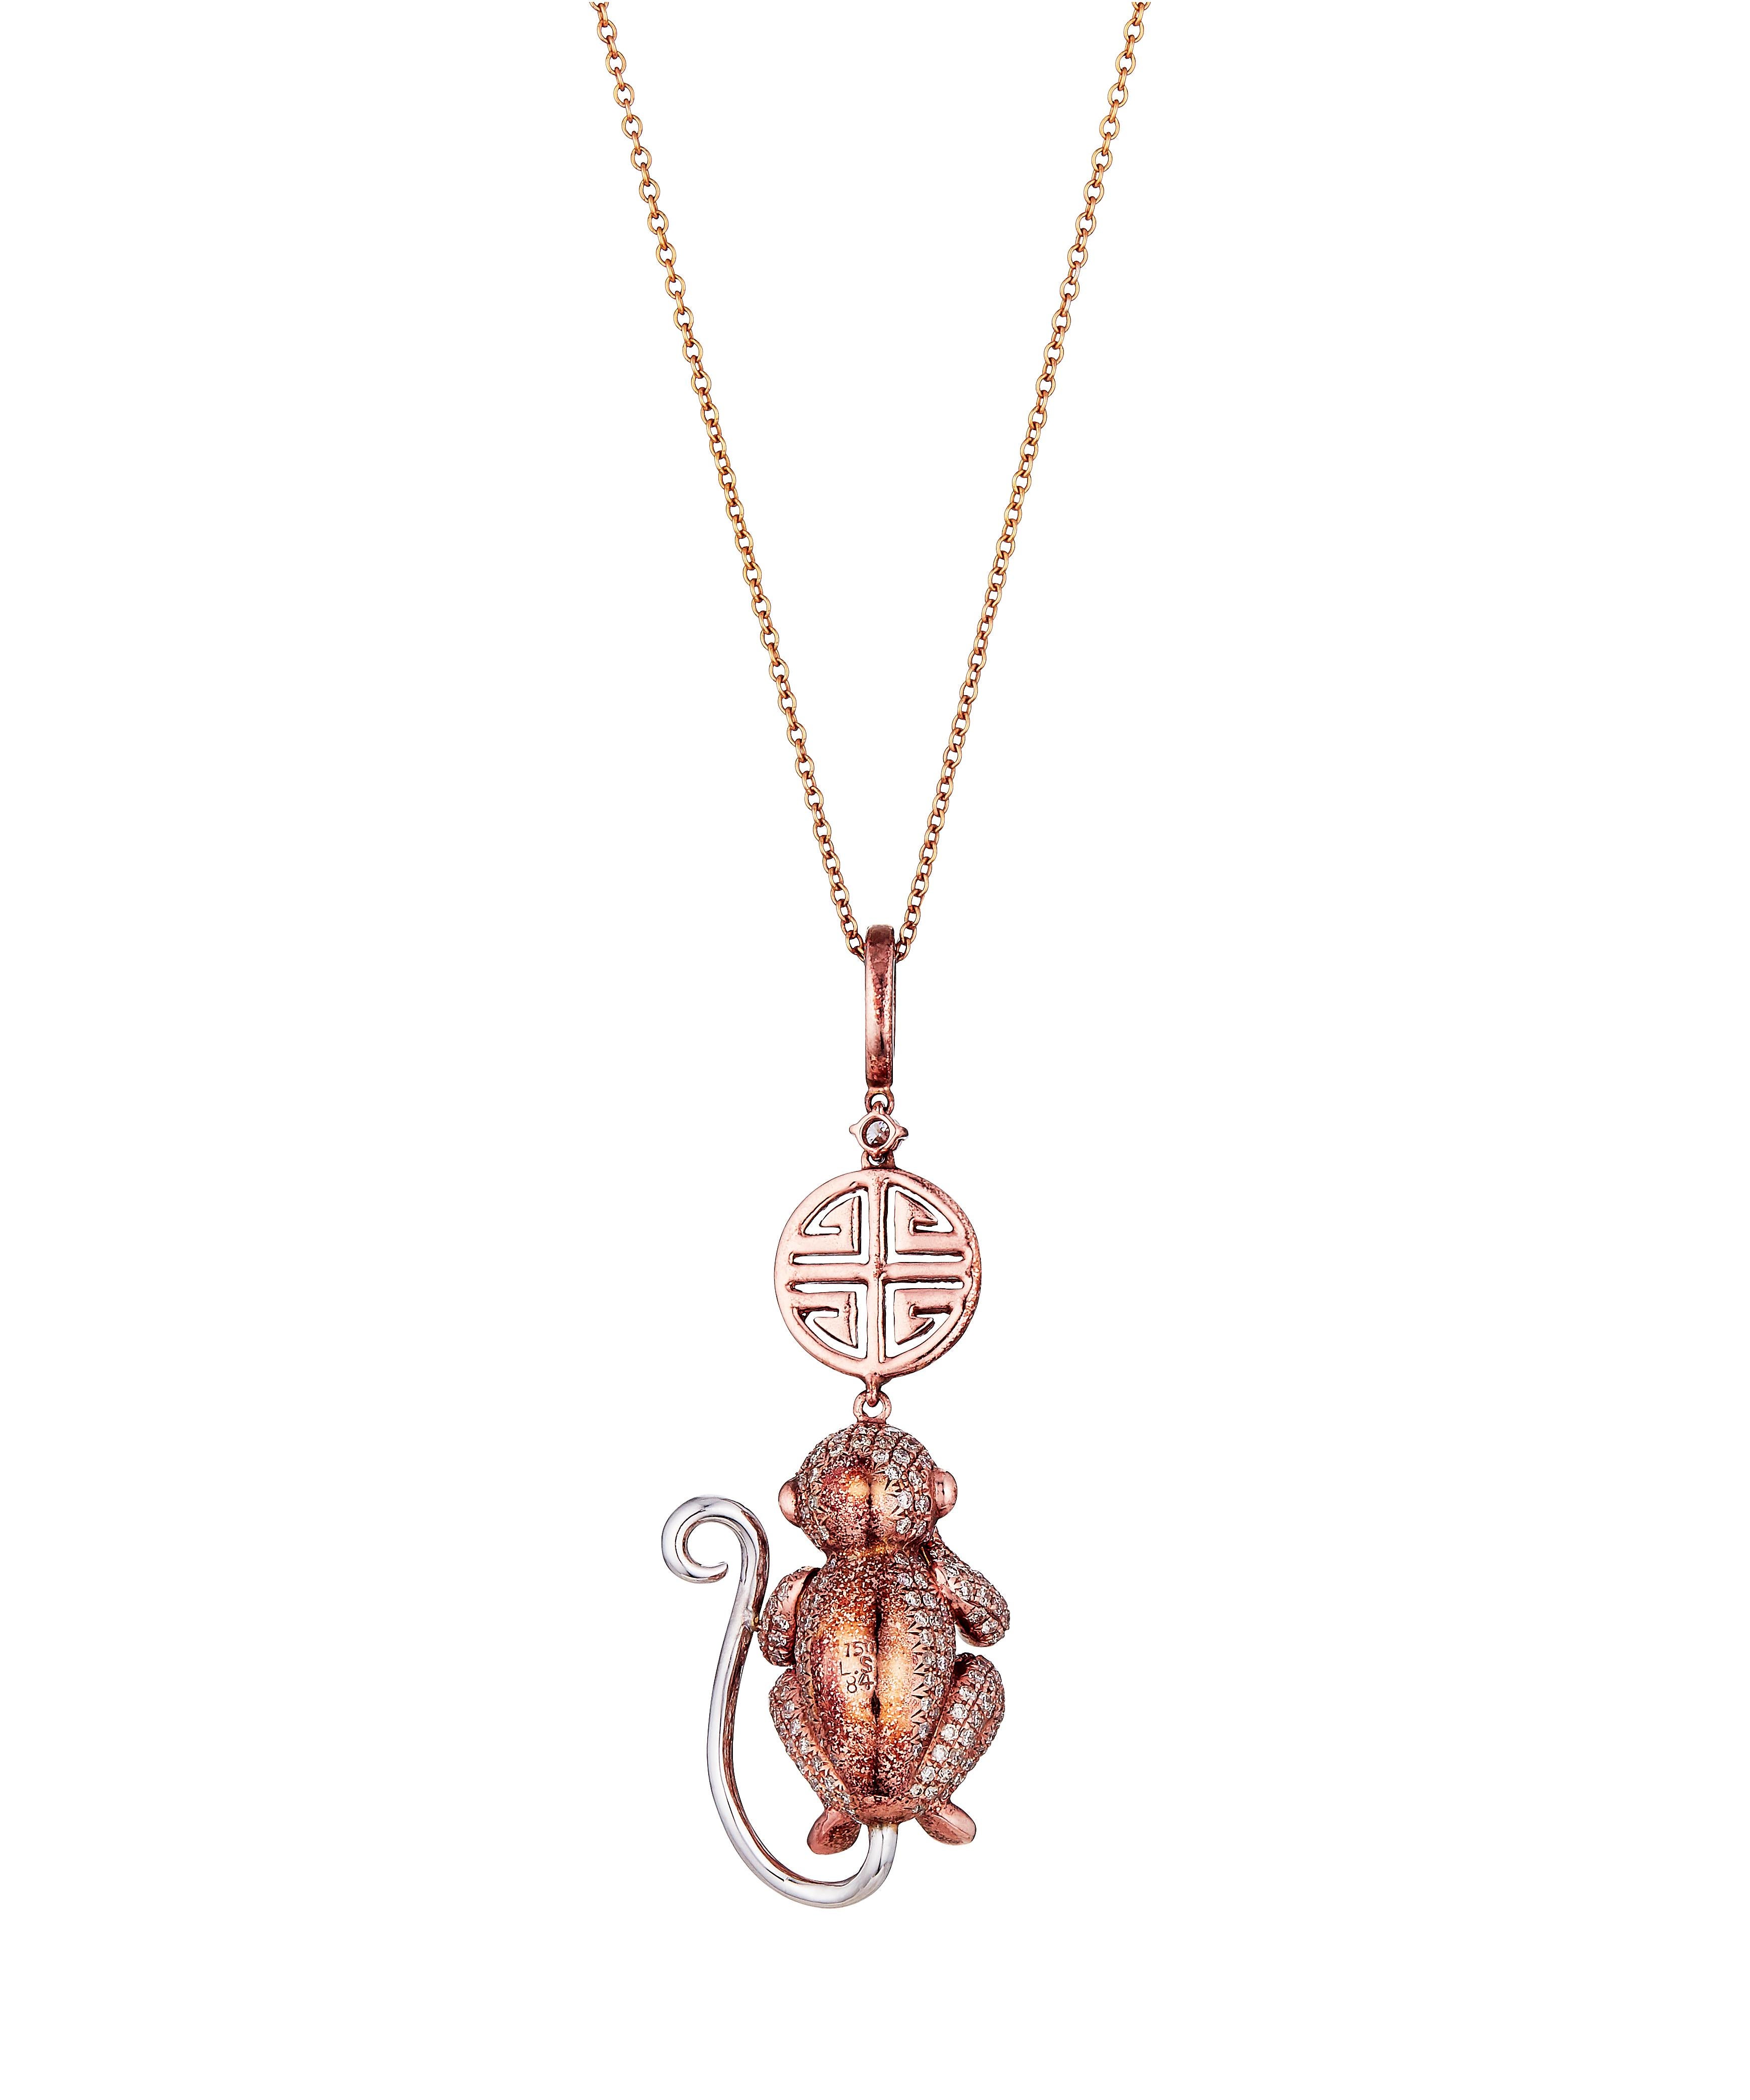 spectral necklace of the monkey